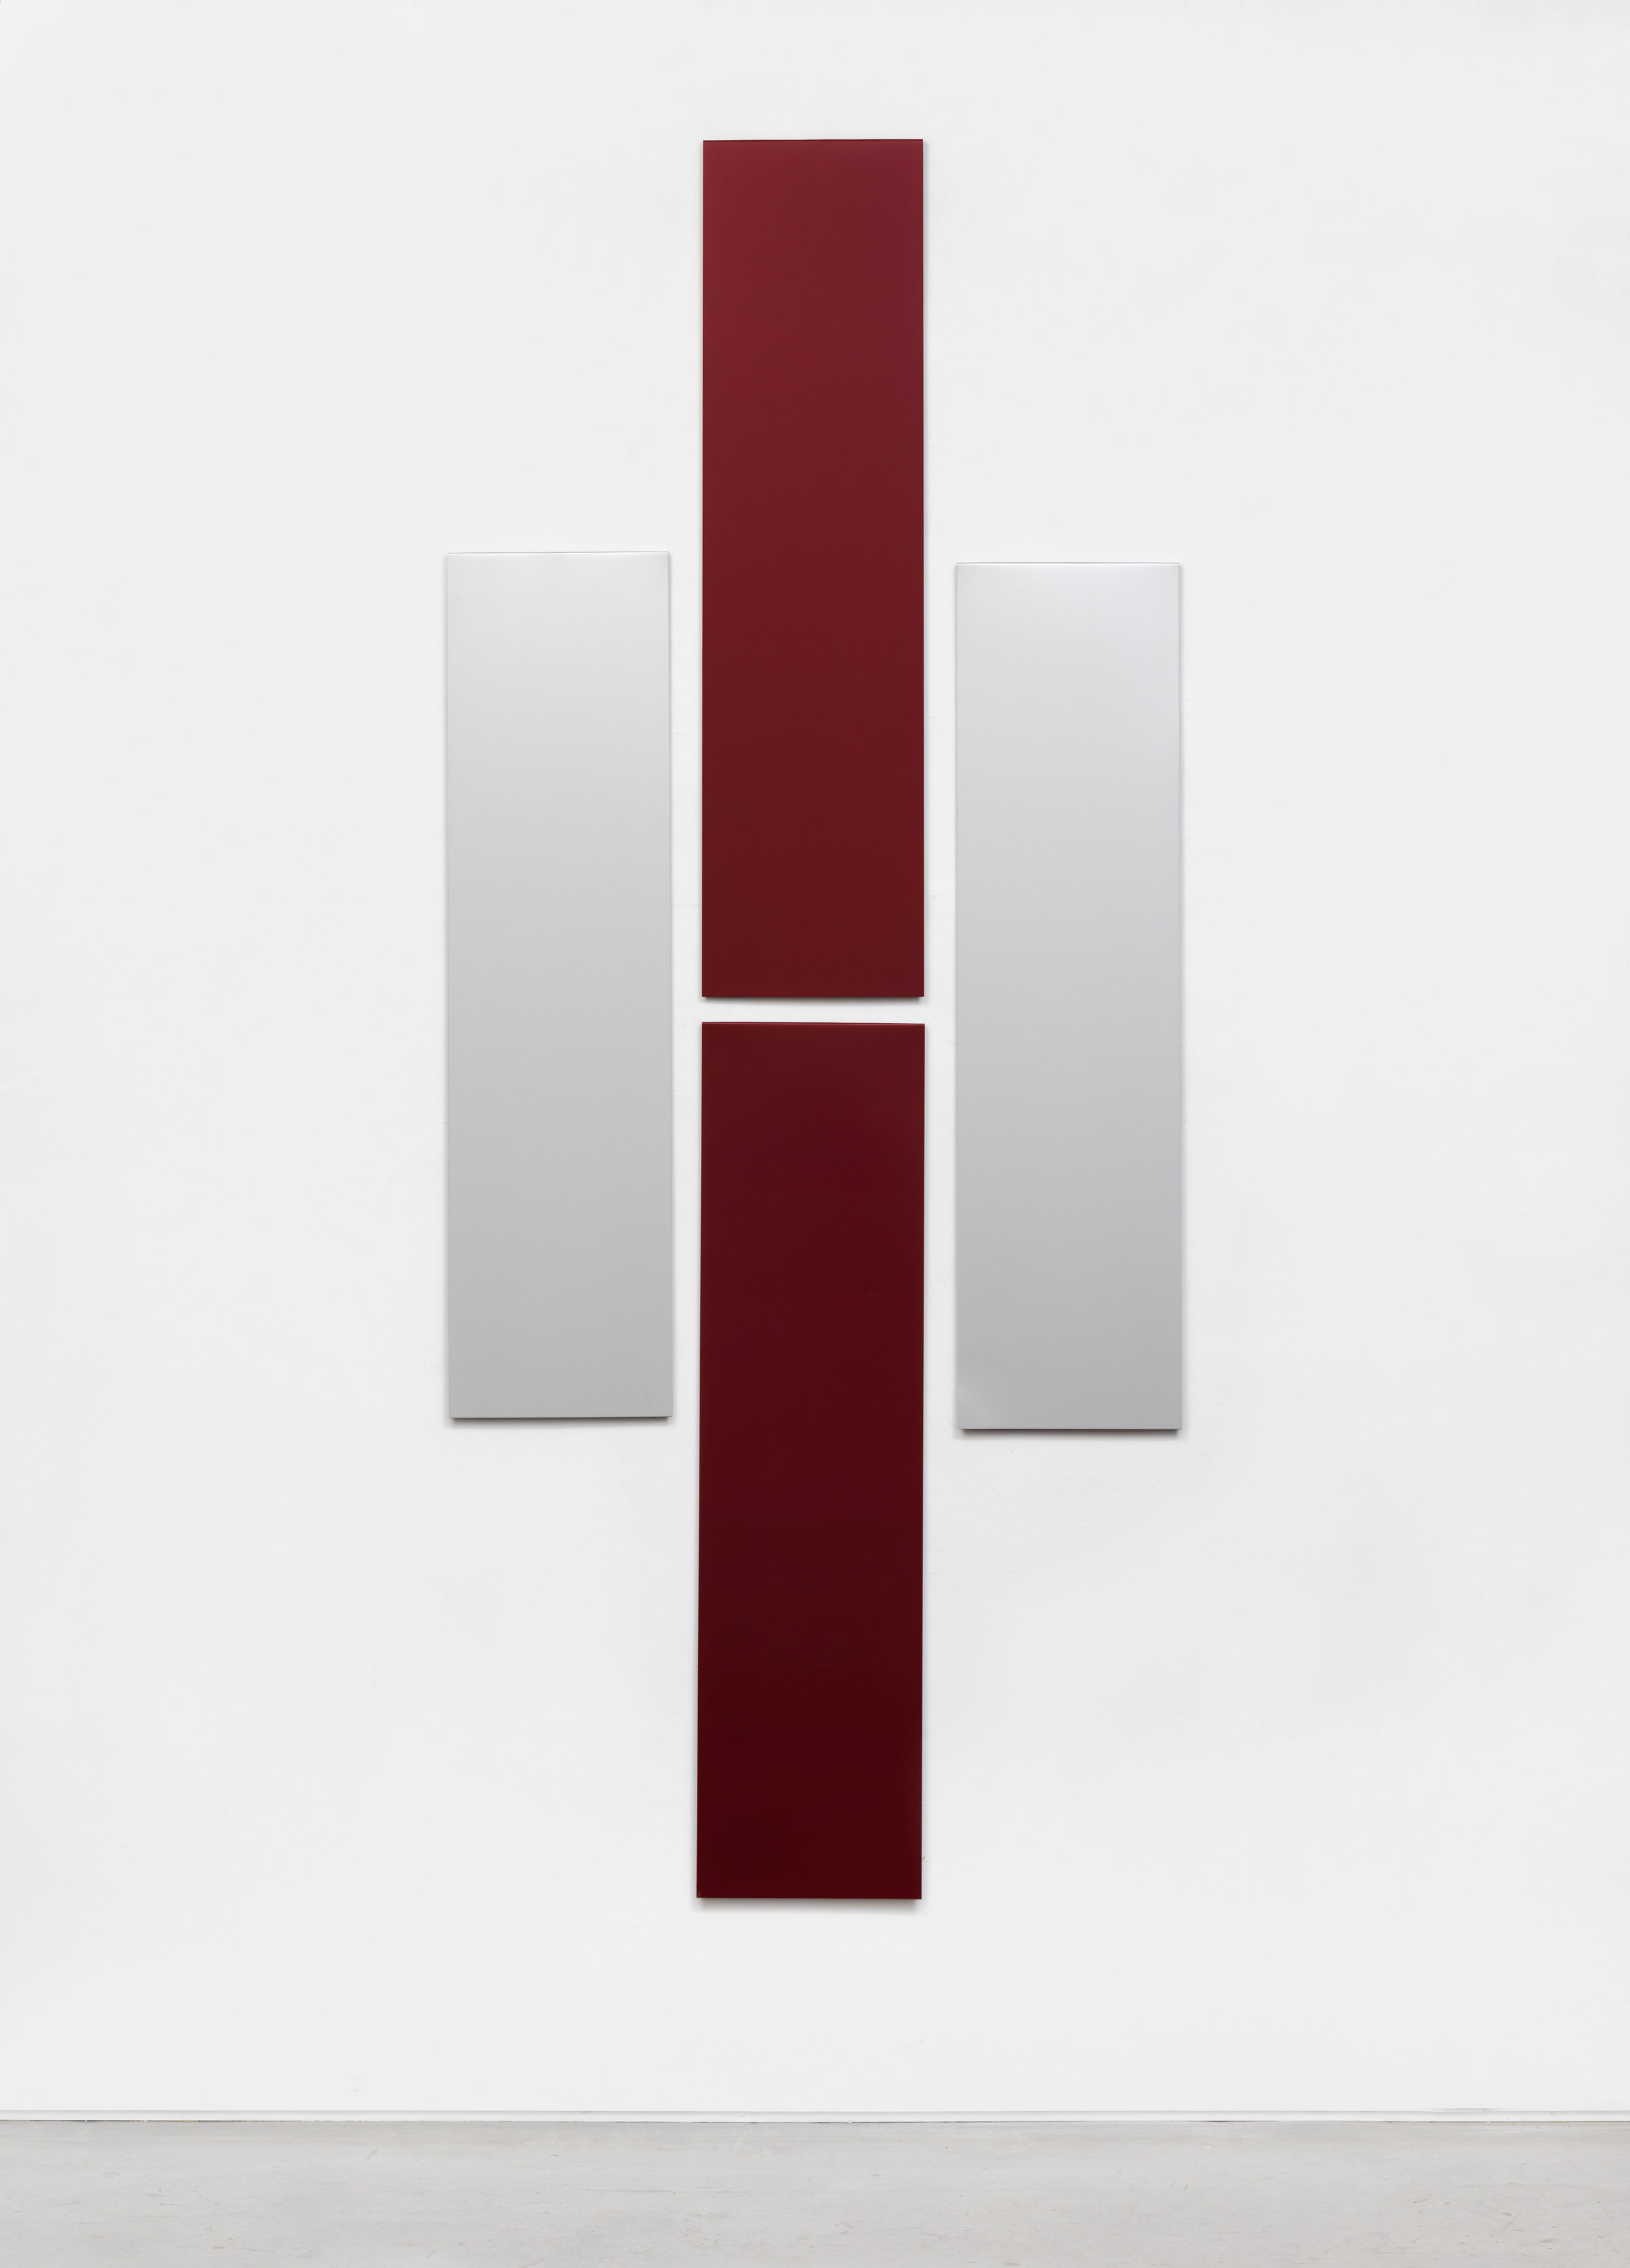 Don Dudley, Untitled (Aluminum Module), 1973-2018, acrylic lacquer on aluminum, each module 46.75 x 12 in; overall 96 x 40 in.